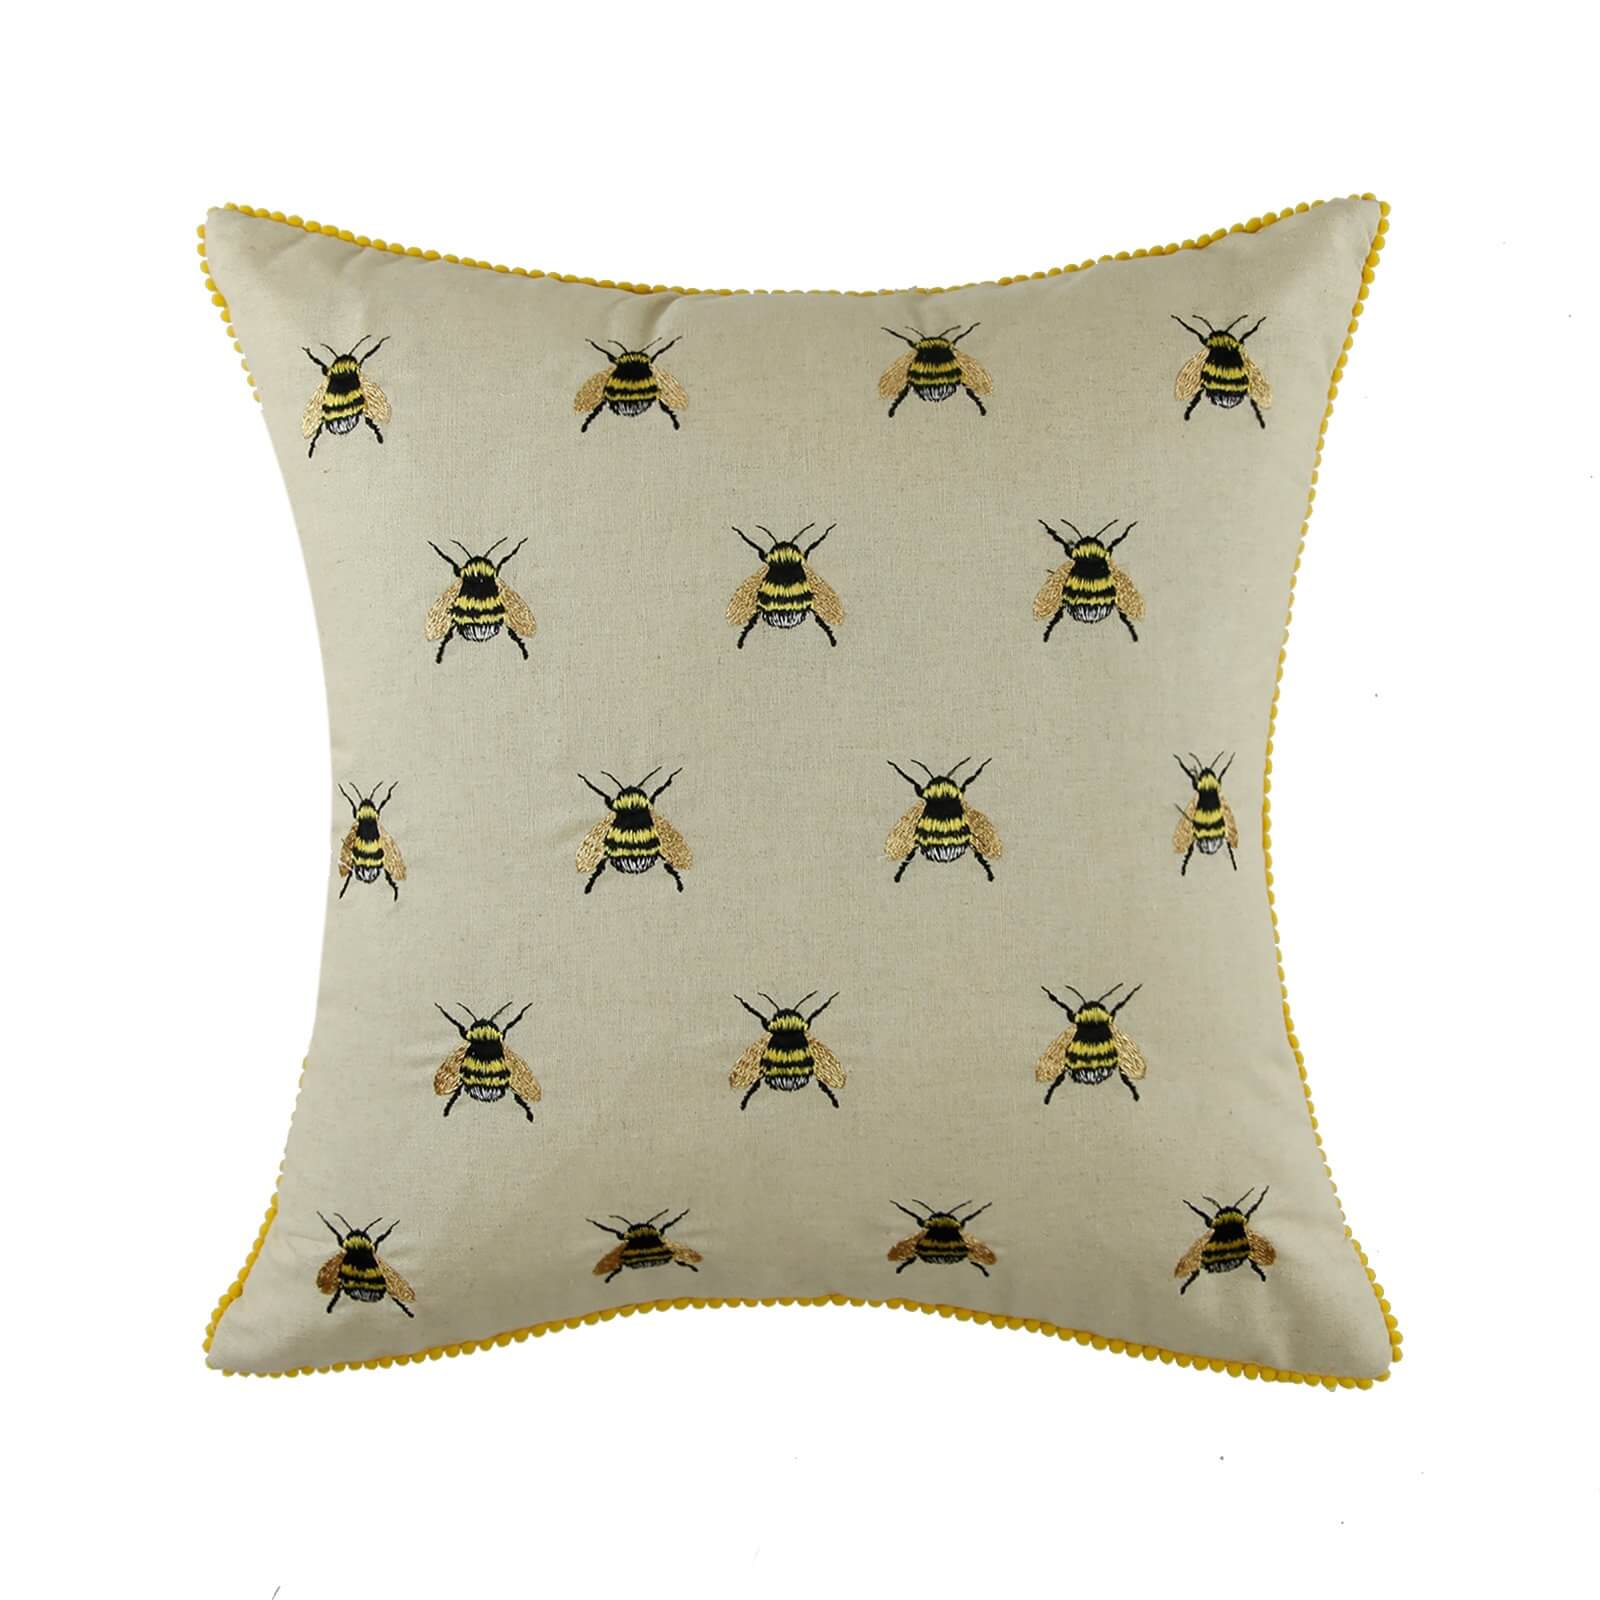 Embroidered Bumble Bee Cushion